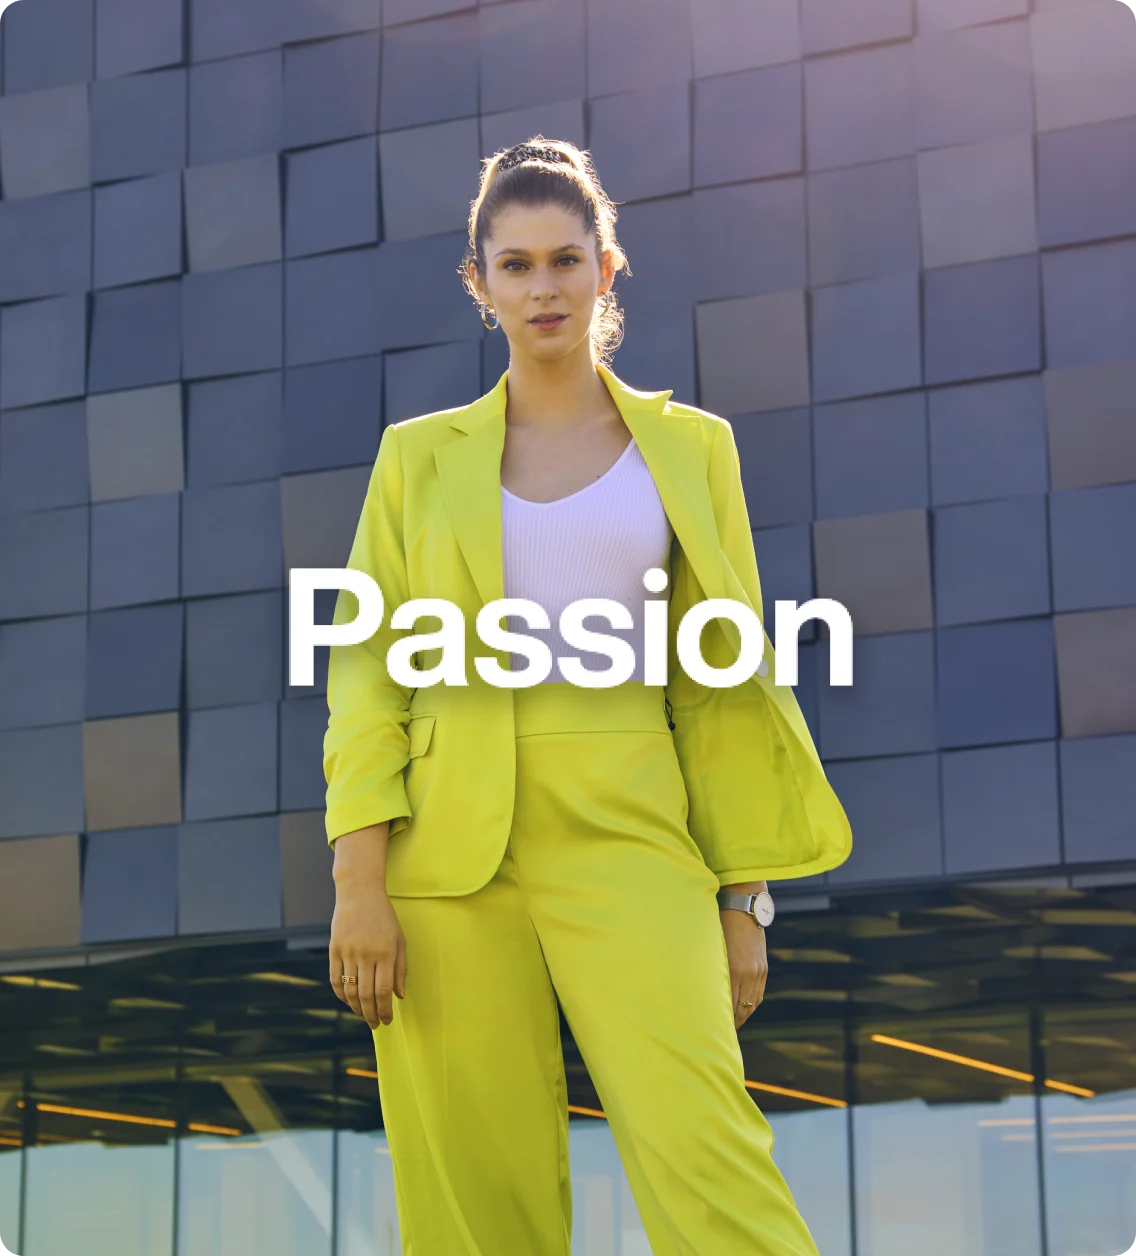 Rachelle Séguin standing in front of office building overlaid with word “passion”